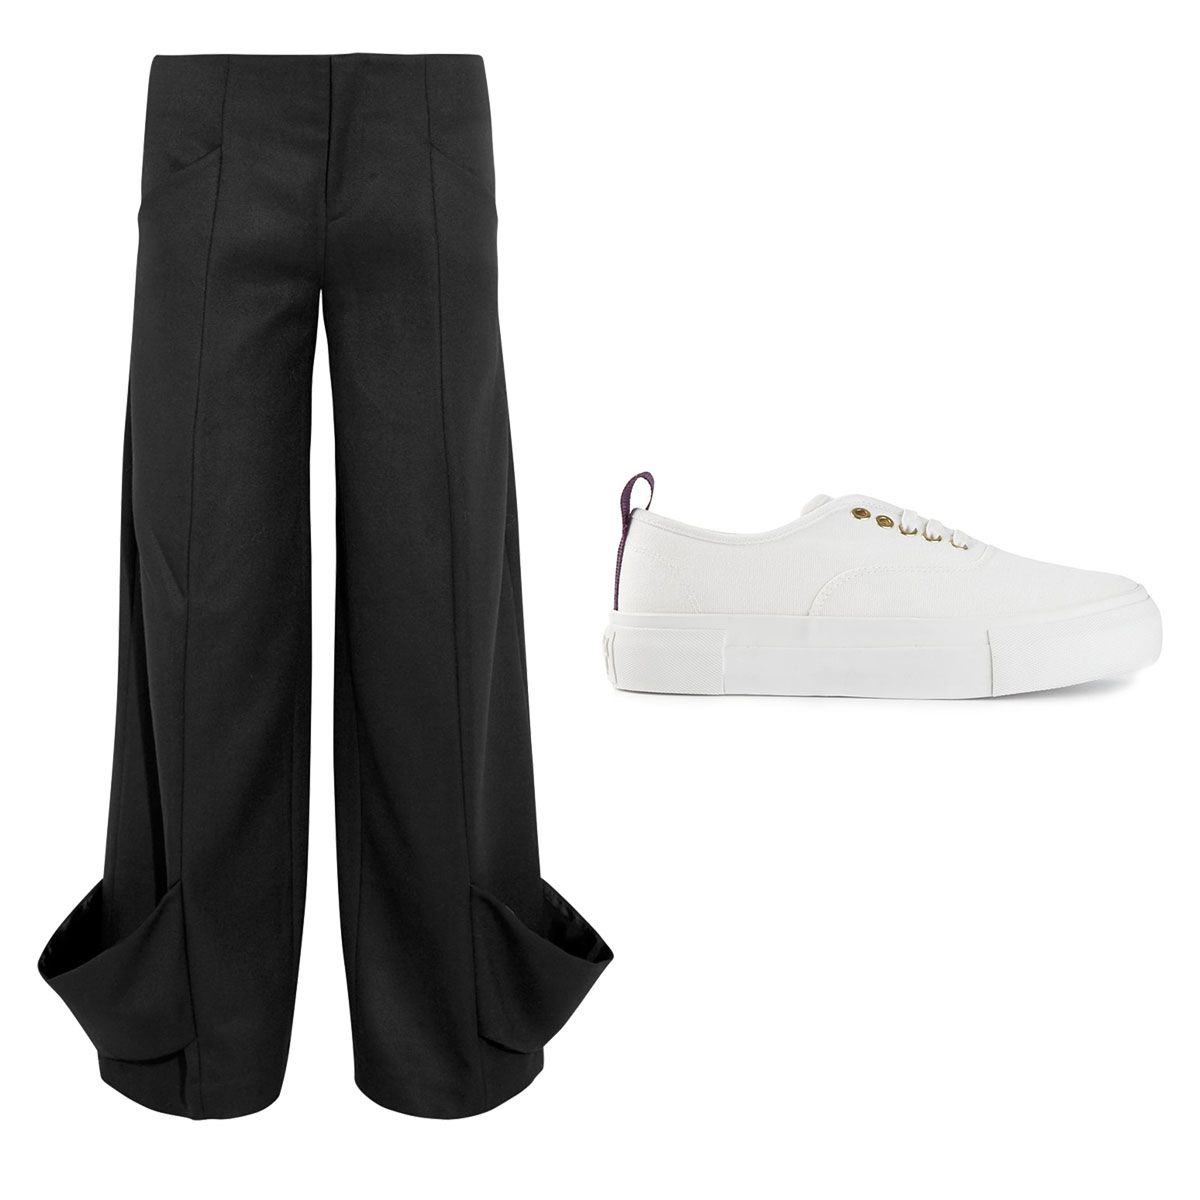 What Shoes to Wear with Wide leg Pants Outfits  Trousers  14 Styles